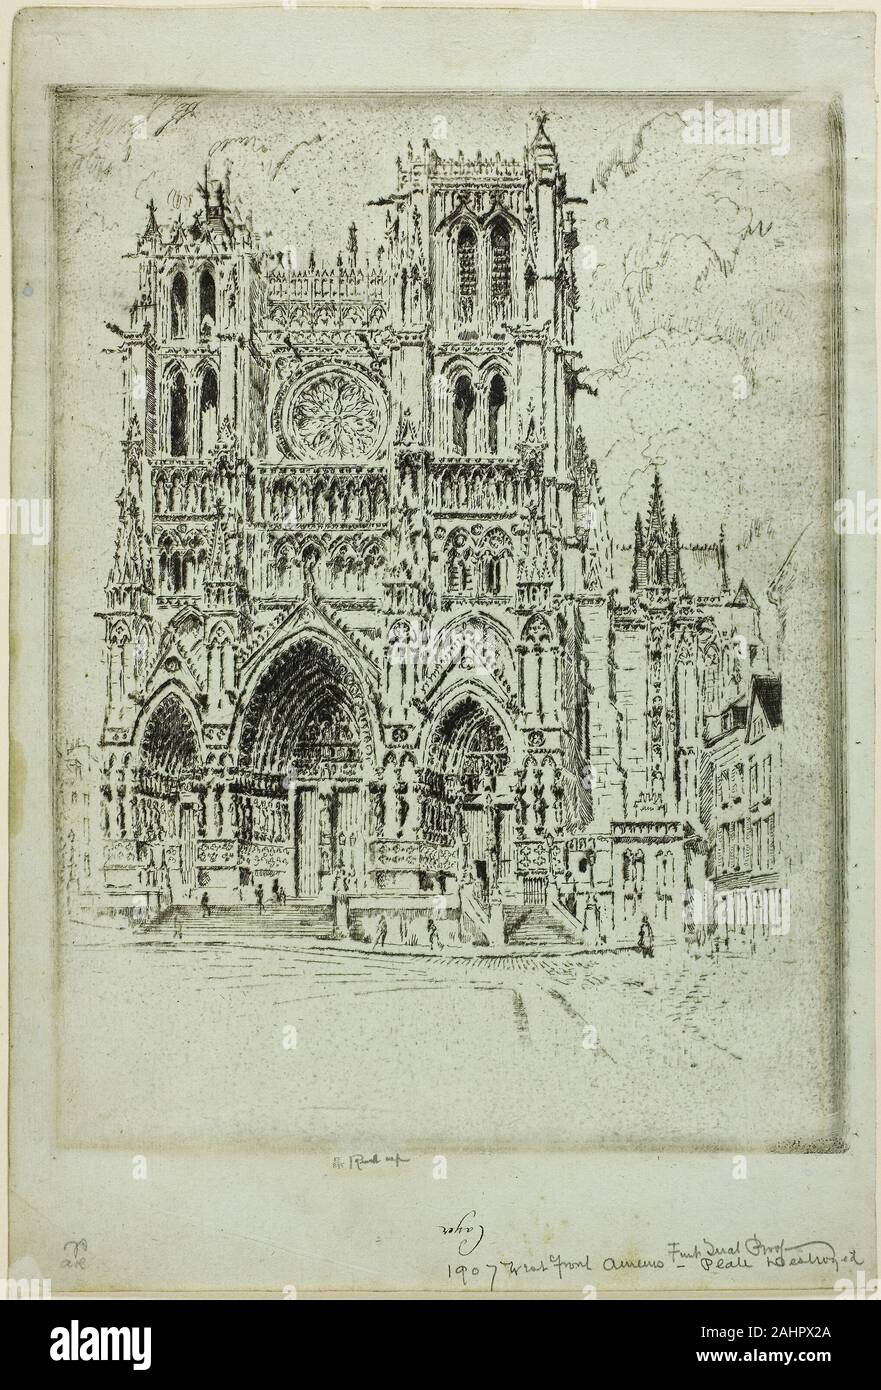 Joseph Pennell. The West Front, Amiens. 1907. United States. Etching on blue-gray laid paper Stock Photo